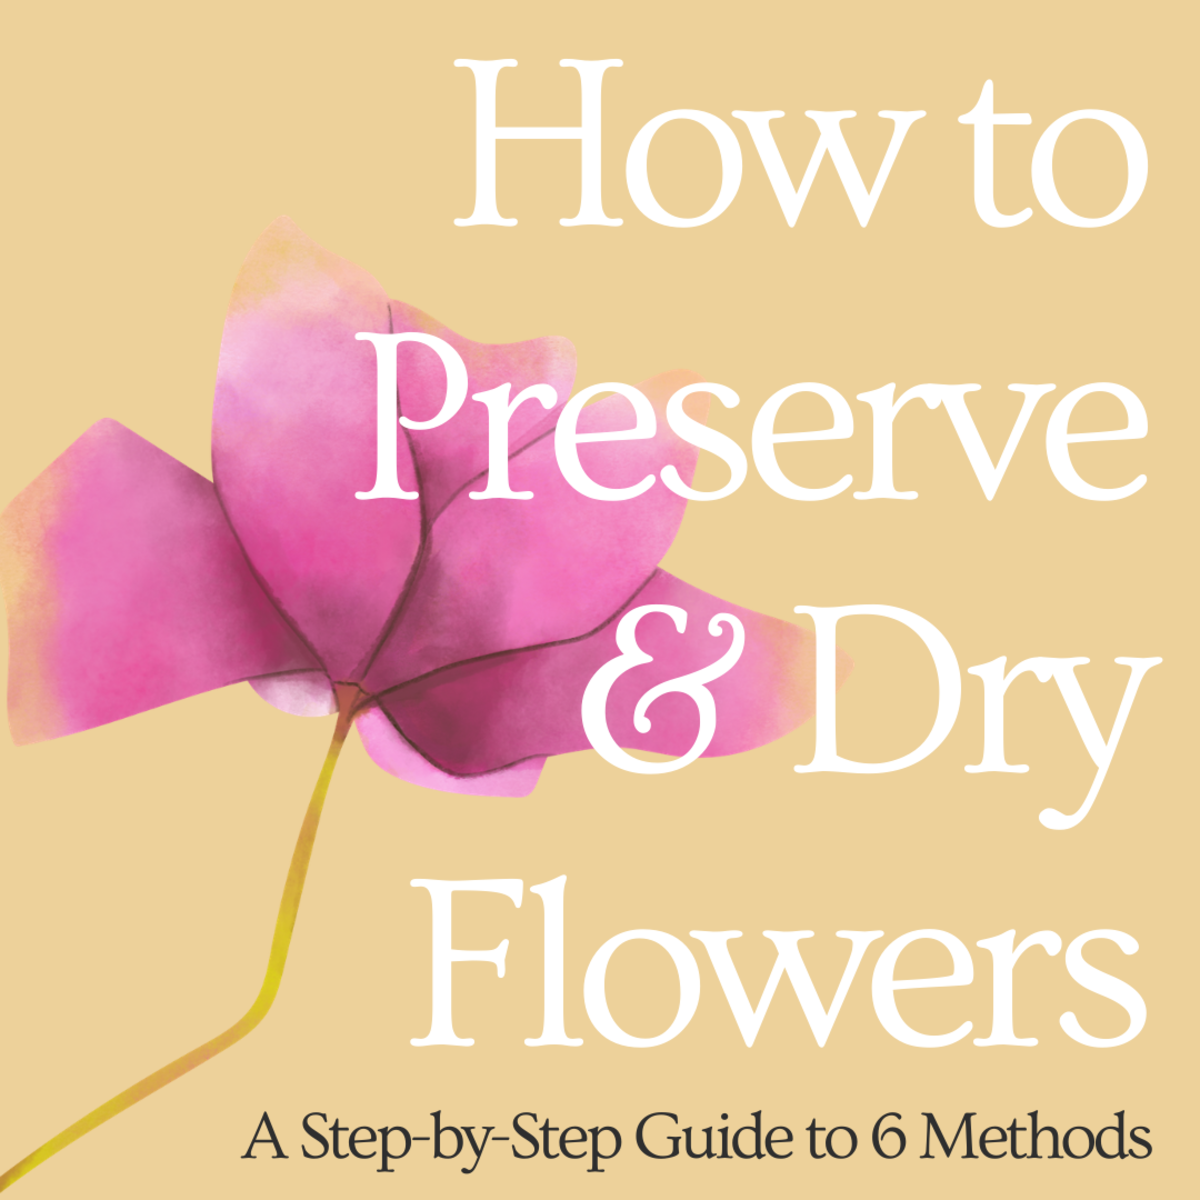 How to Preserve Flowers (6 Ways of Drying Flowers)